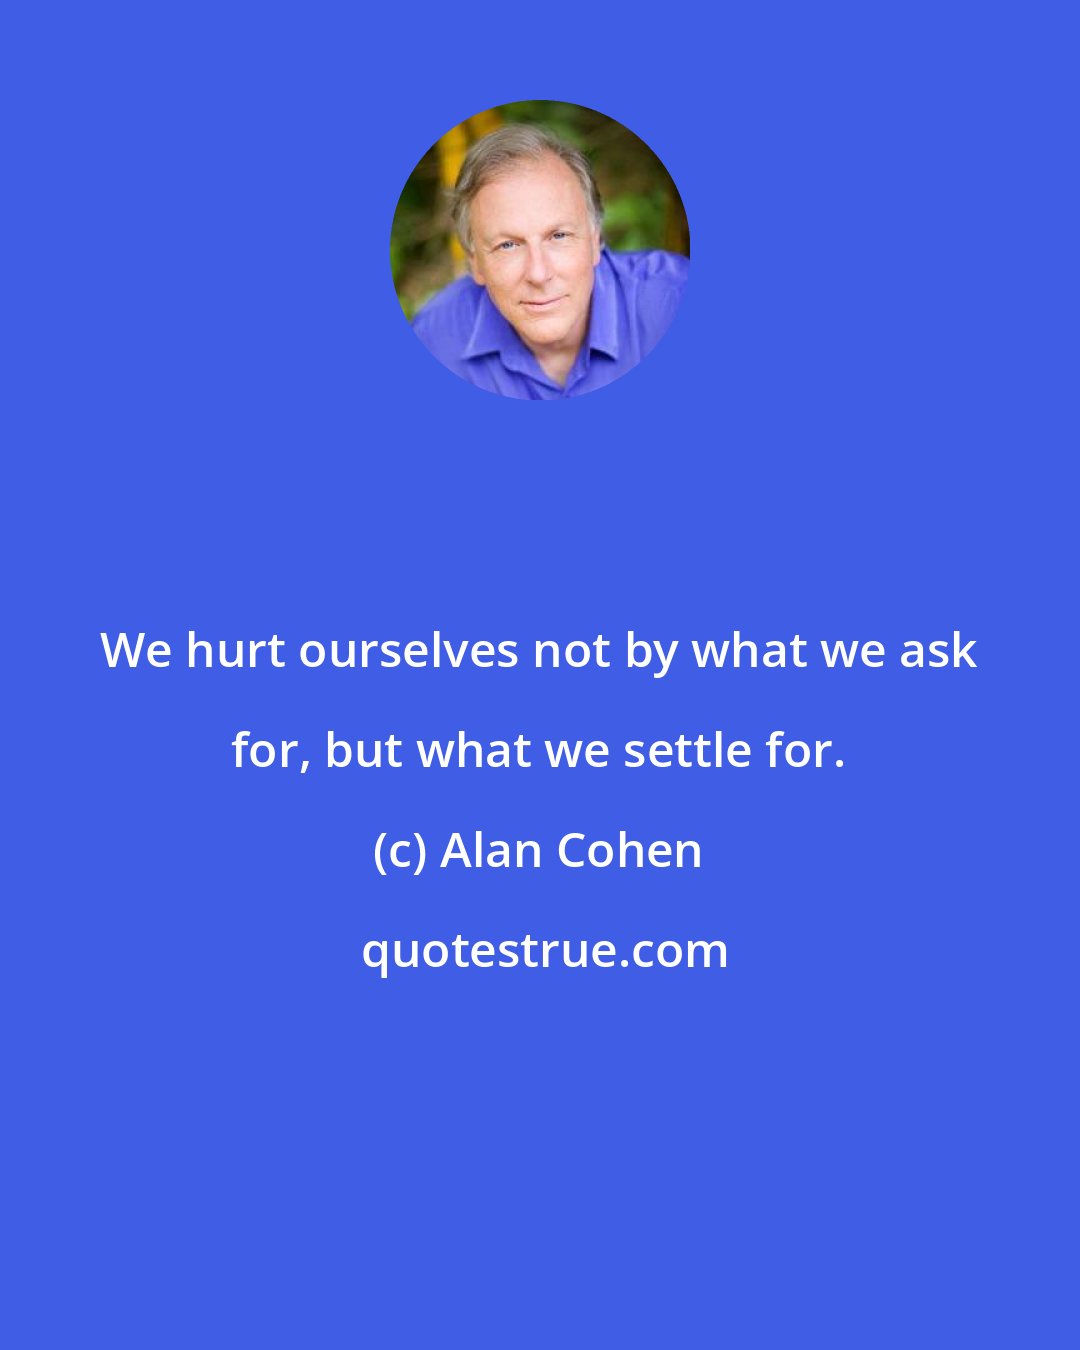 Alan Cohen: We hurt ourselves not by what we ask for, but what we settle for.